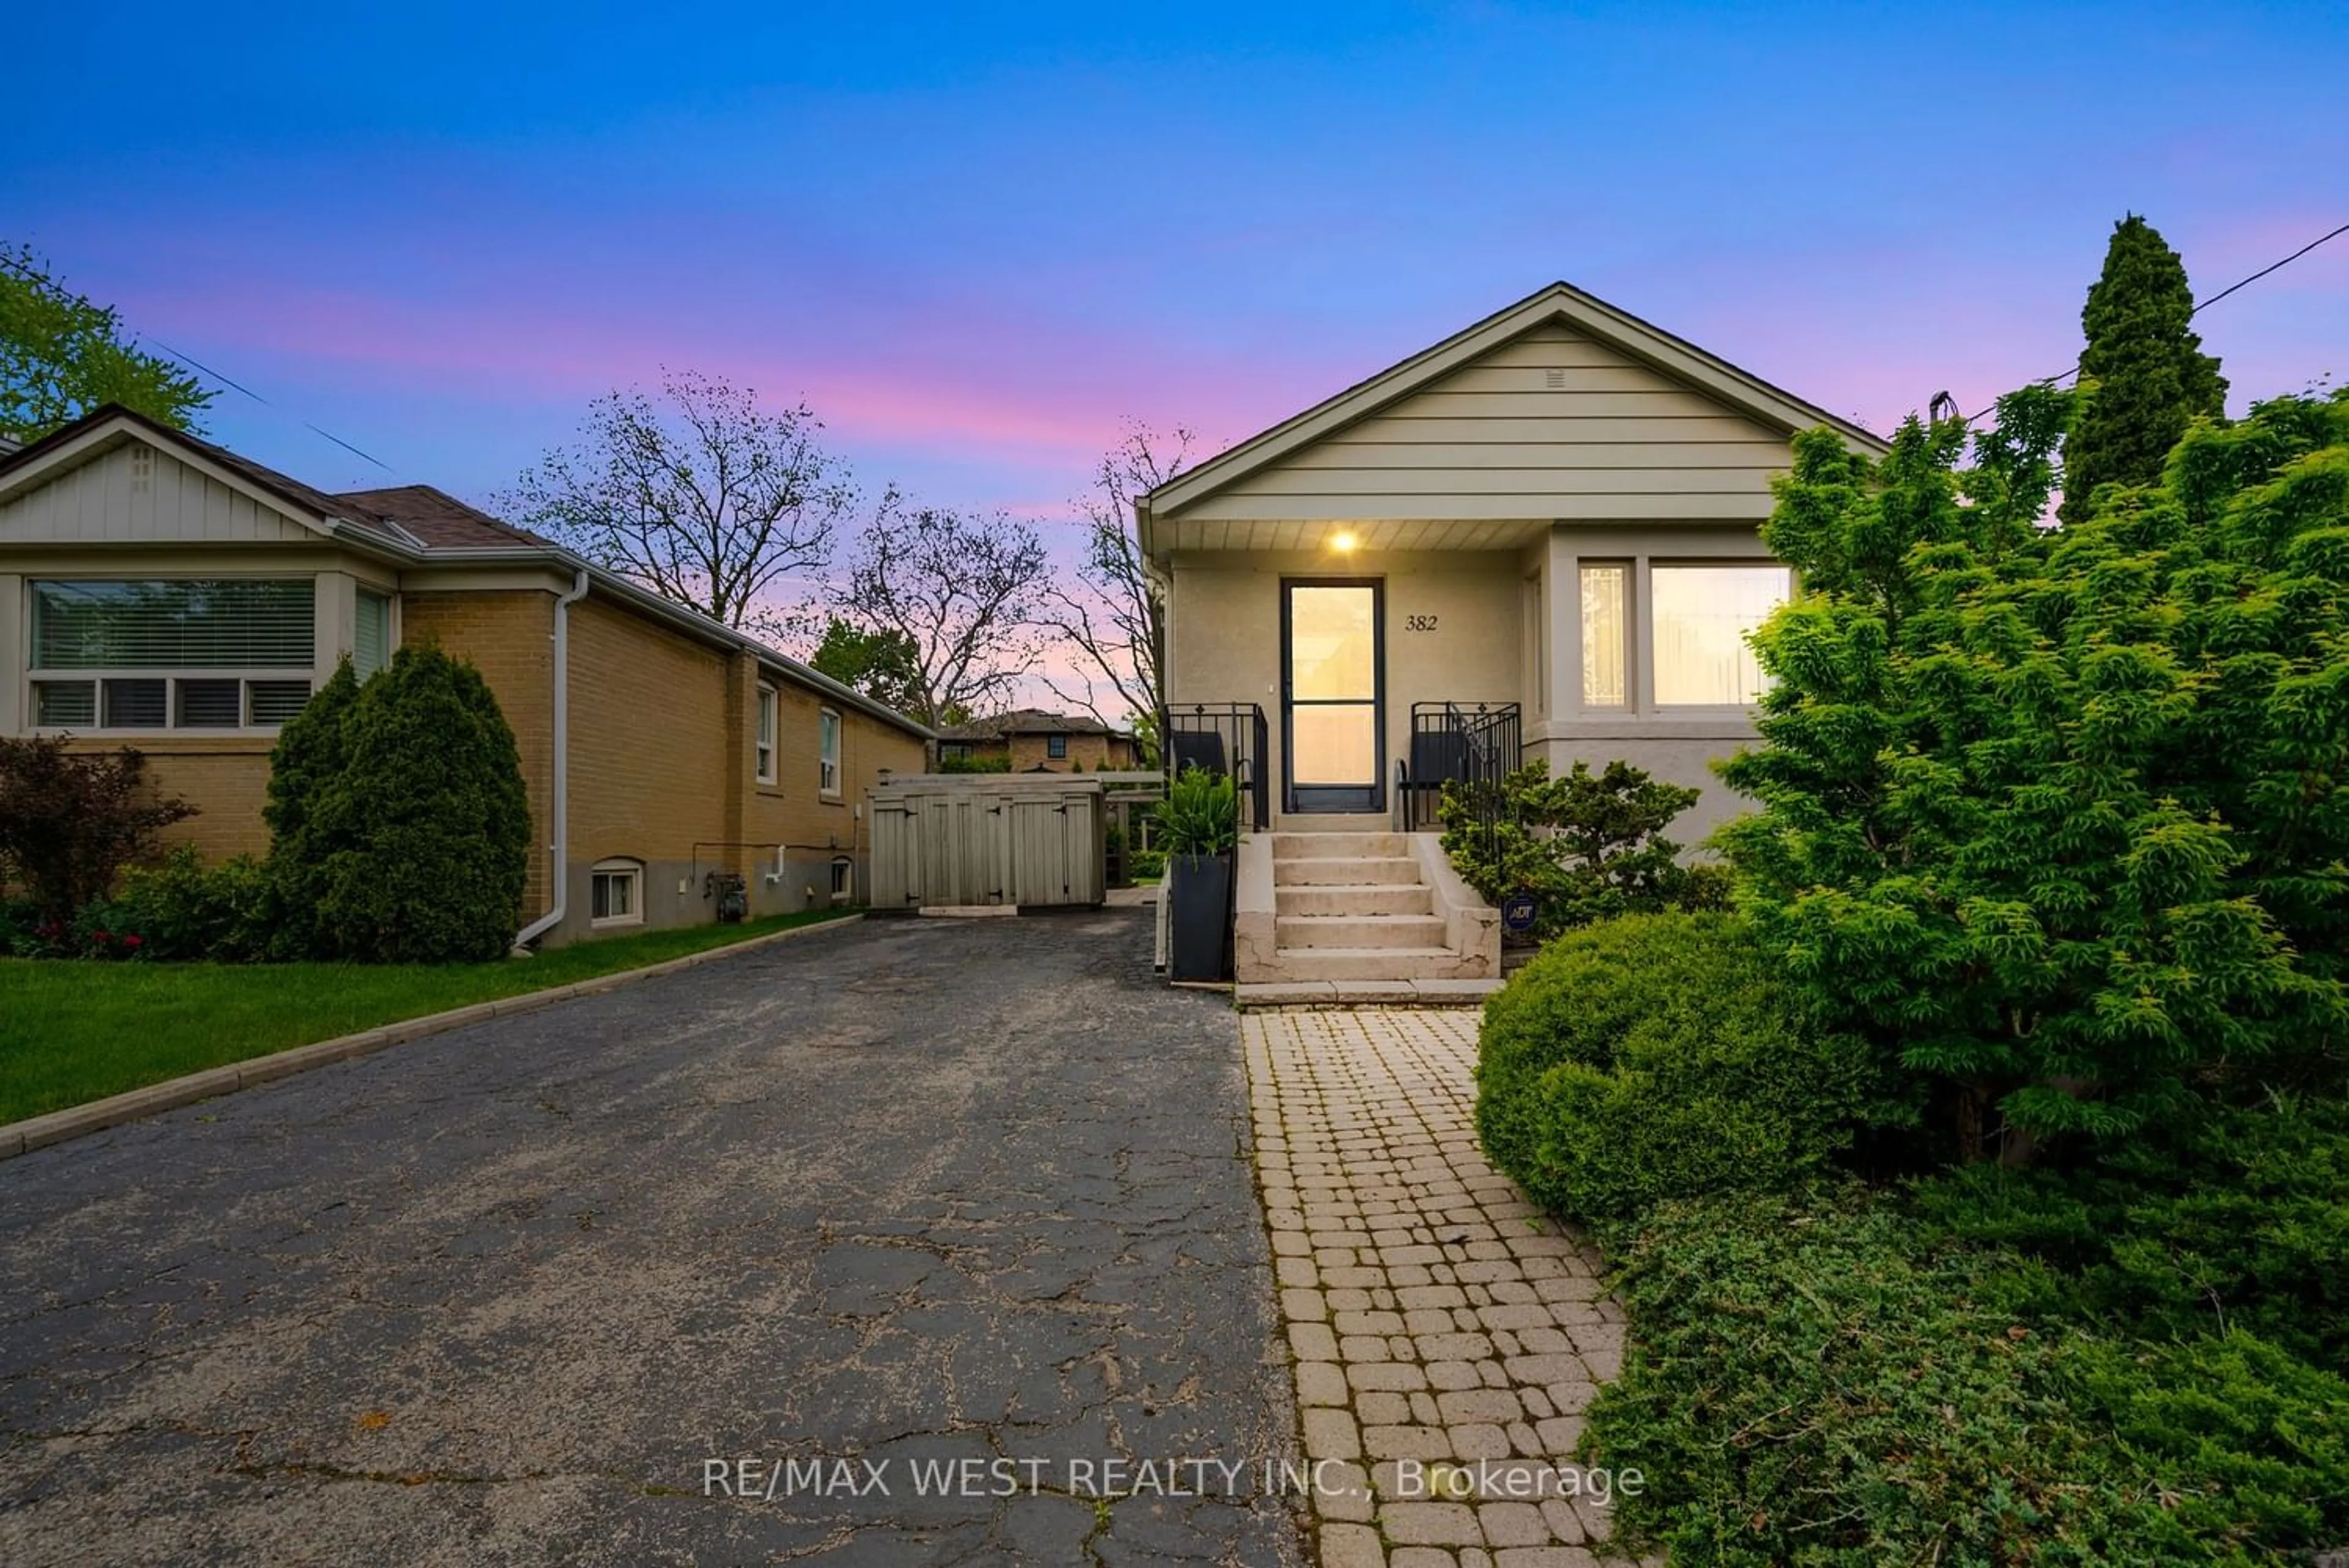 Frontside or backside of a home for 382 Brooke Ave, Toronto Ontario M5M 2L6